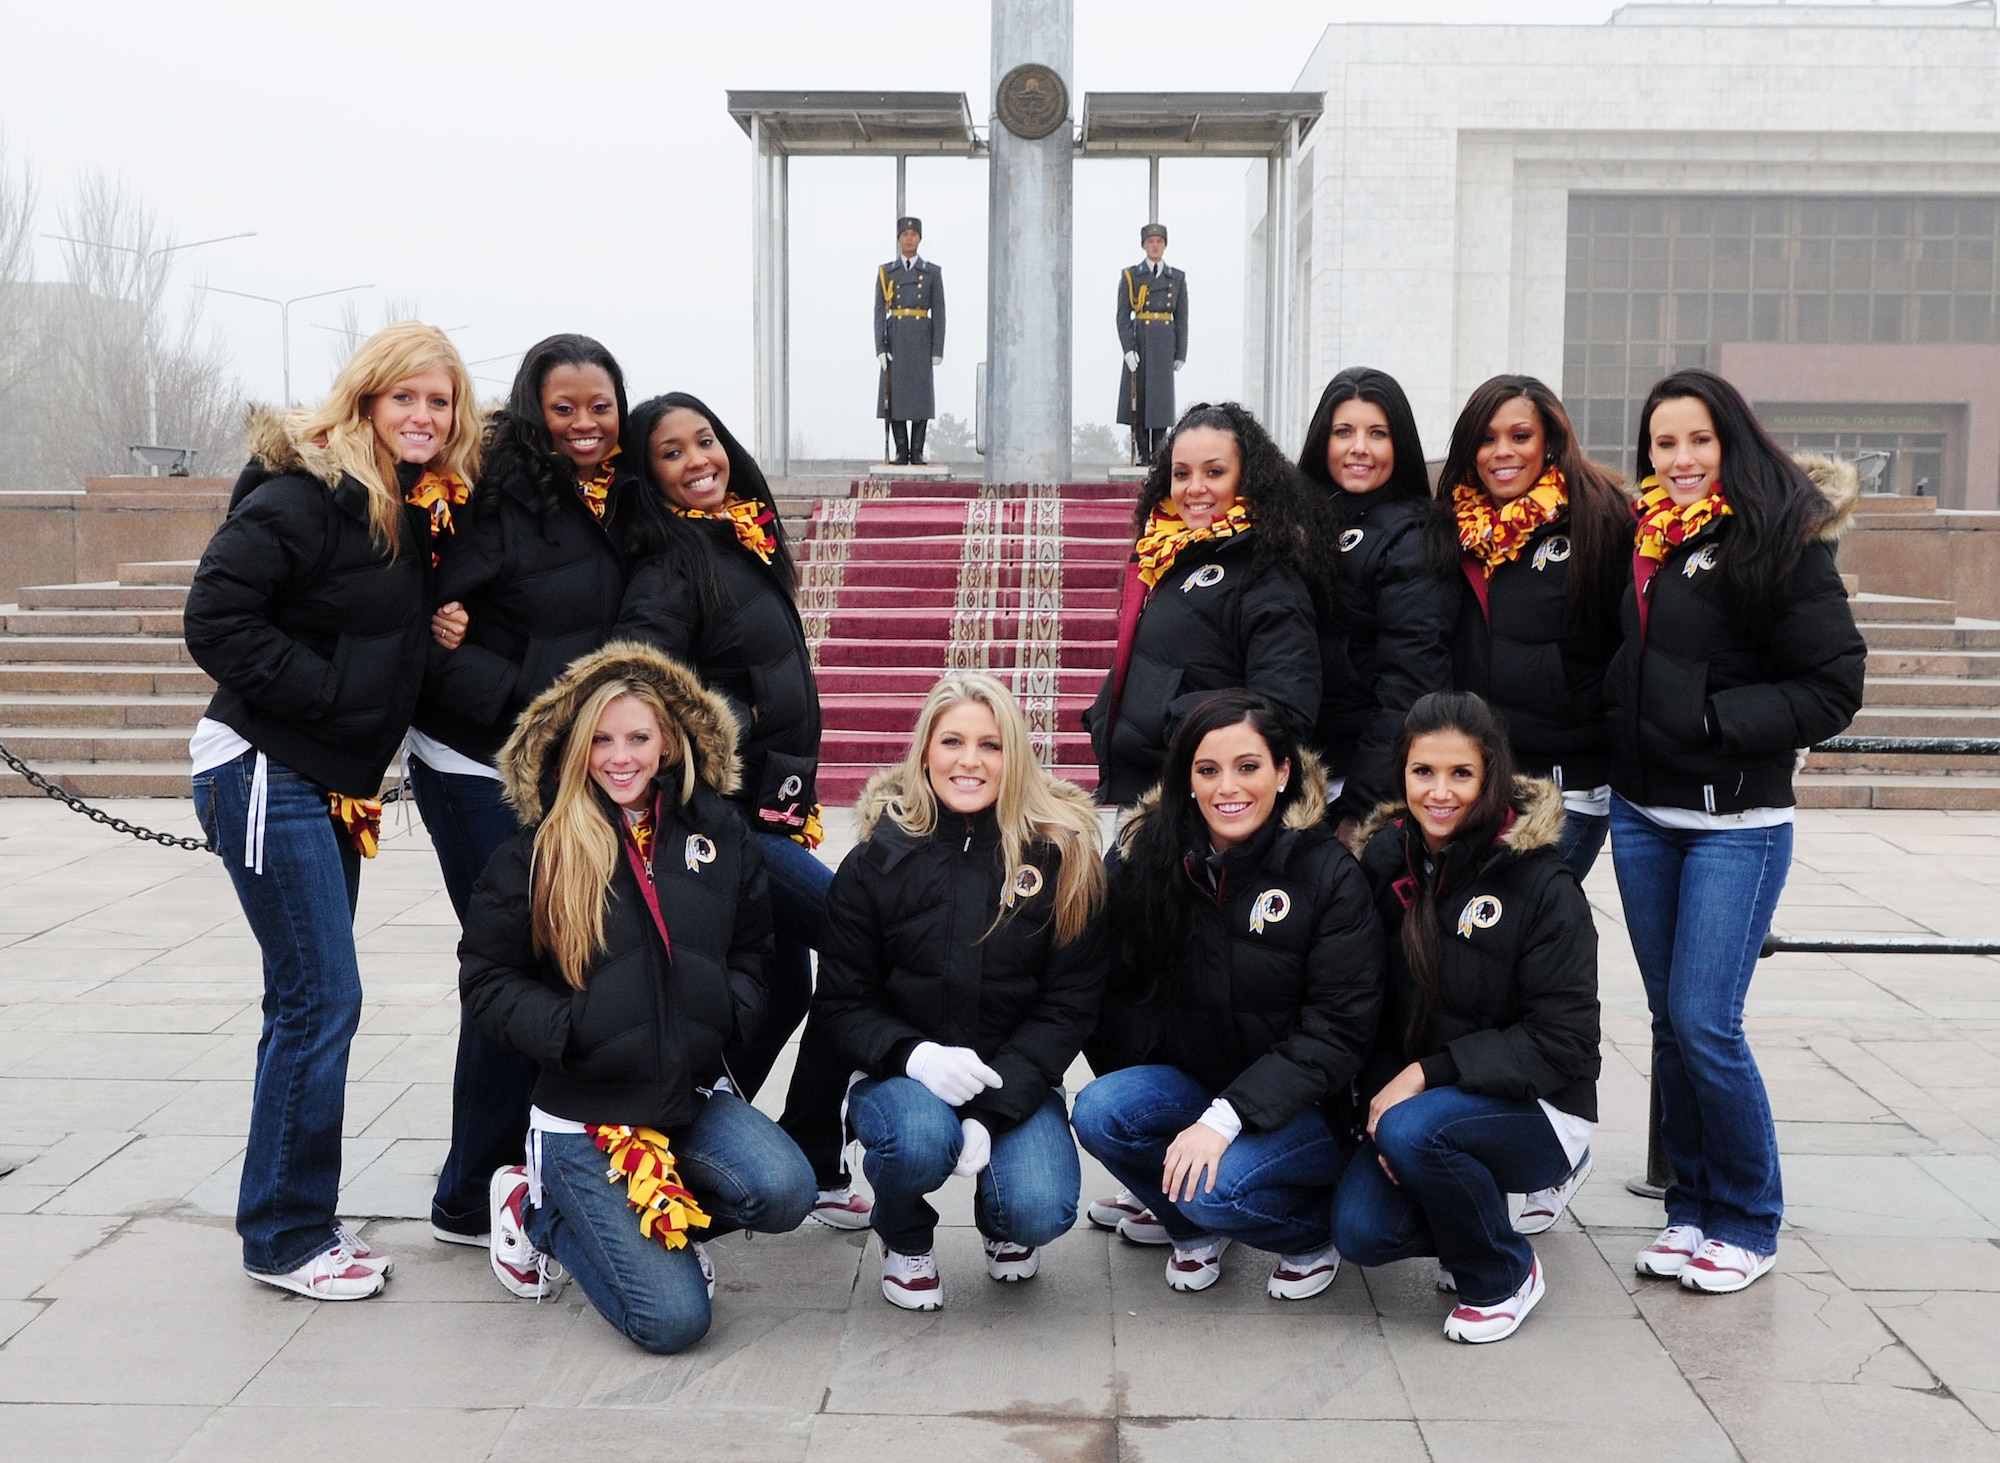 The Washington Redskins cheerleaders pose for a photograph in front of the guards during a history and cultural tour of downtown Bishkek, Kyrgyzstan, Jan. 27, 2010. Similar to the changing of the guard at the Tomb of the Unknown Soldier in Arlington, Va., guards stand to protect the Kygryz flag 24 hours a day. The Cheerleaders are on a tour sponsored by Armed Forces Entertainment. The Transit Center at Manas is their first stop in a two-week long tour where they will perform for Airmen, Soldiers, Sailors and Marines deployed overseas. (U.S. Air Force photo/Senior Airman Nichelle Anderson/Released